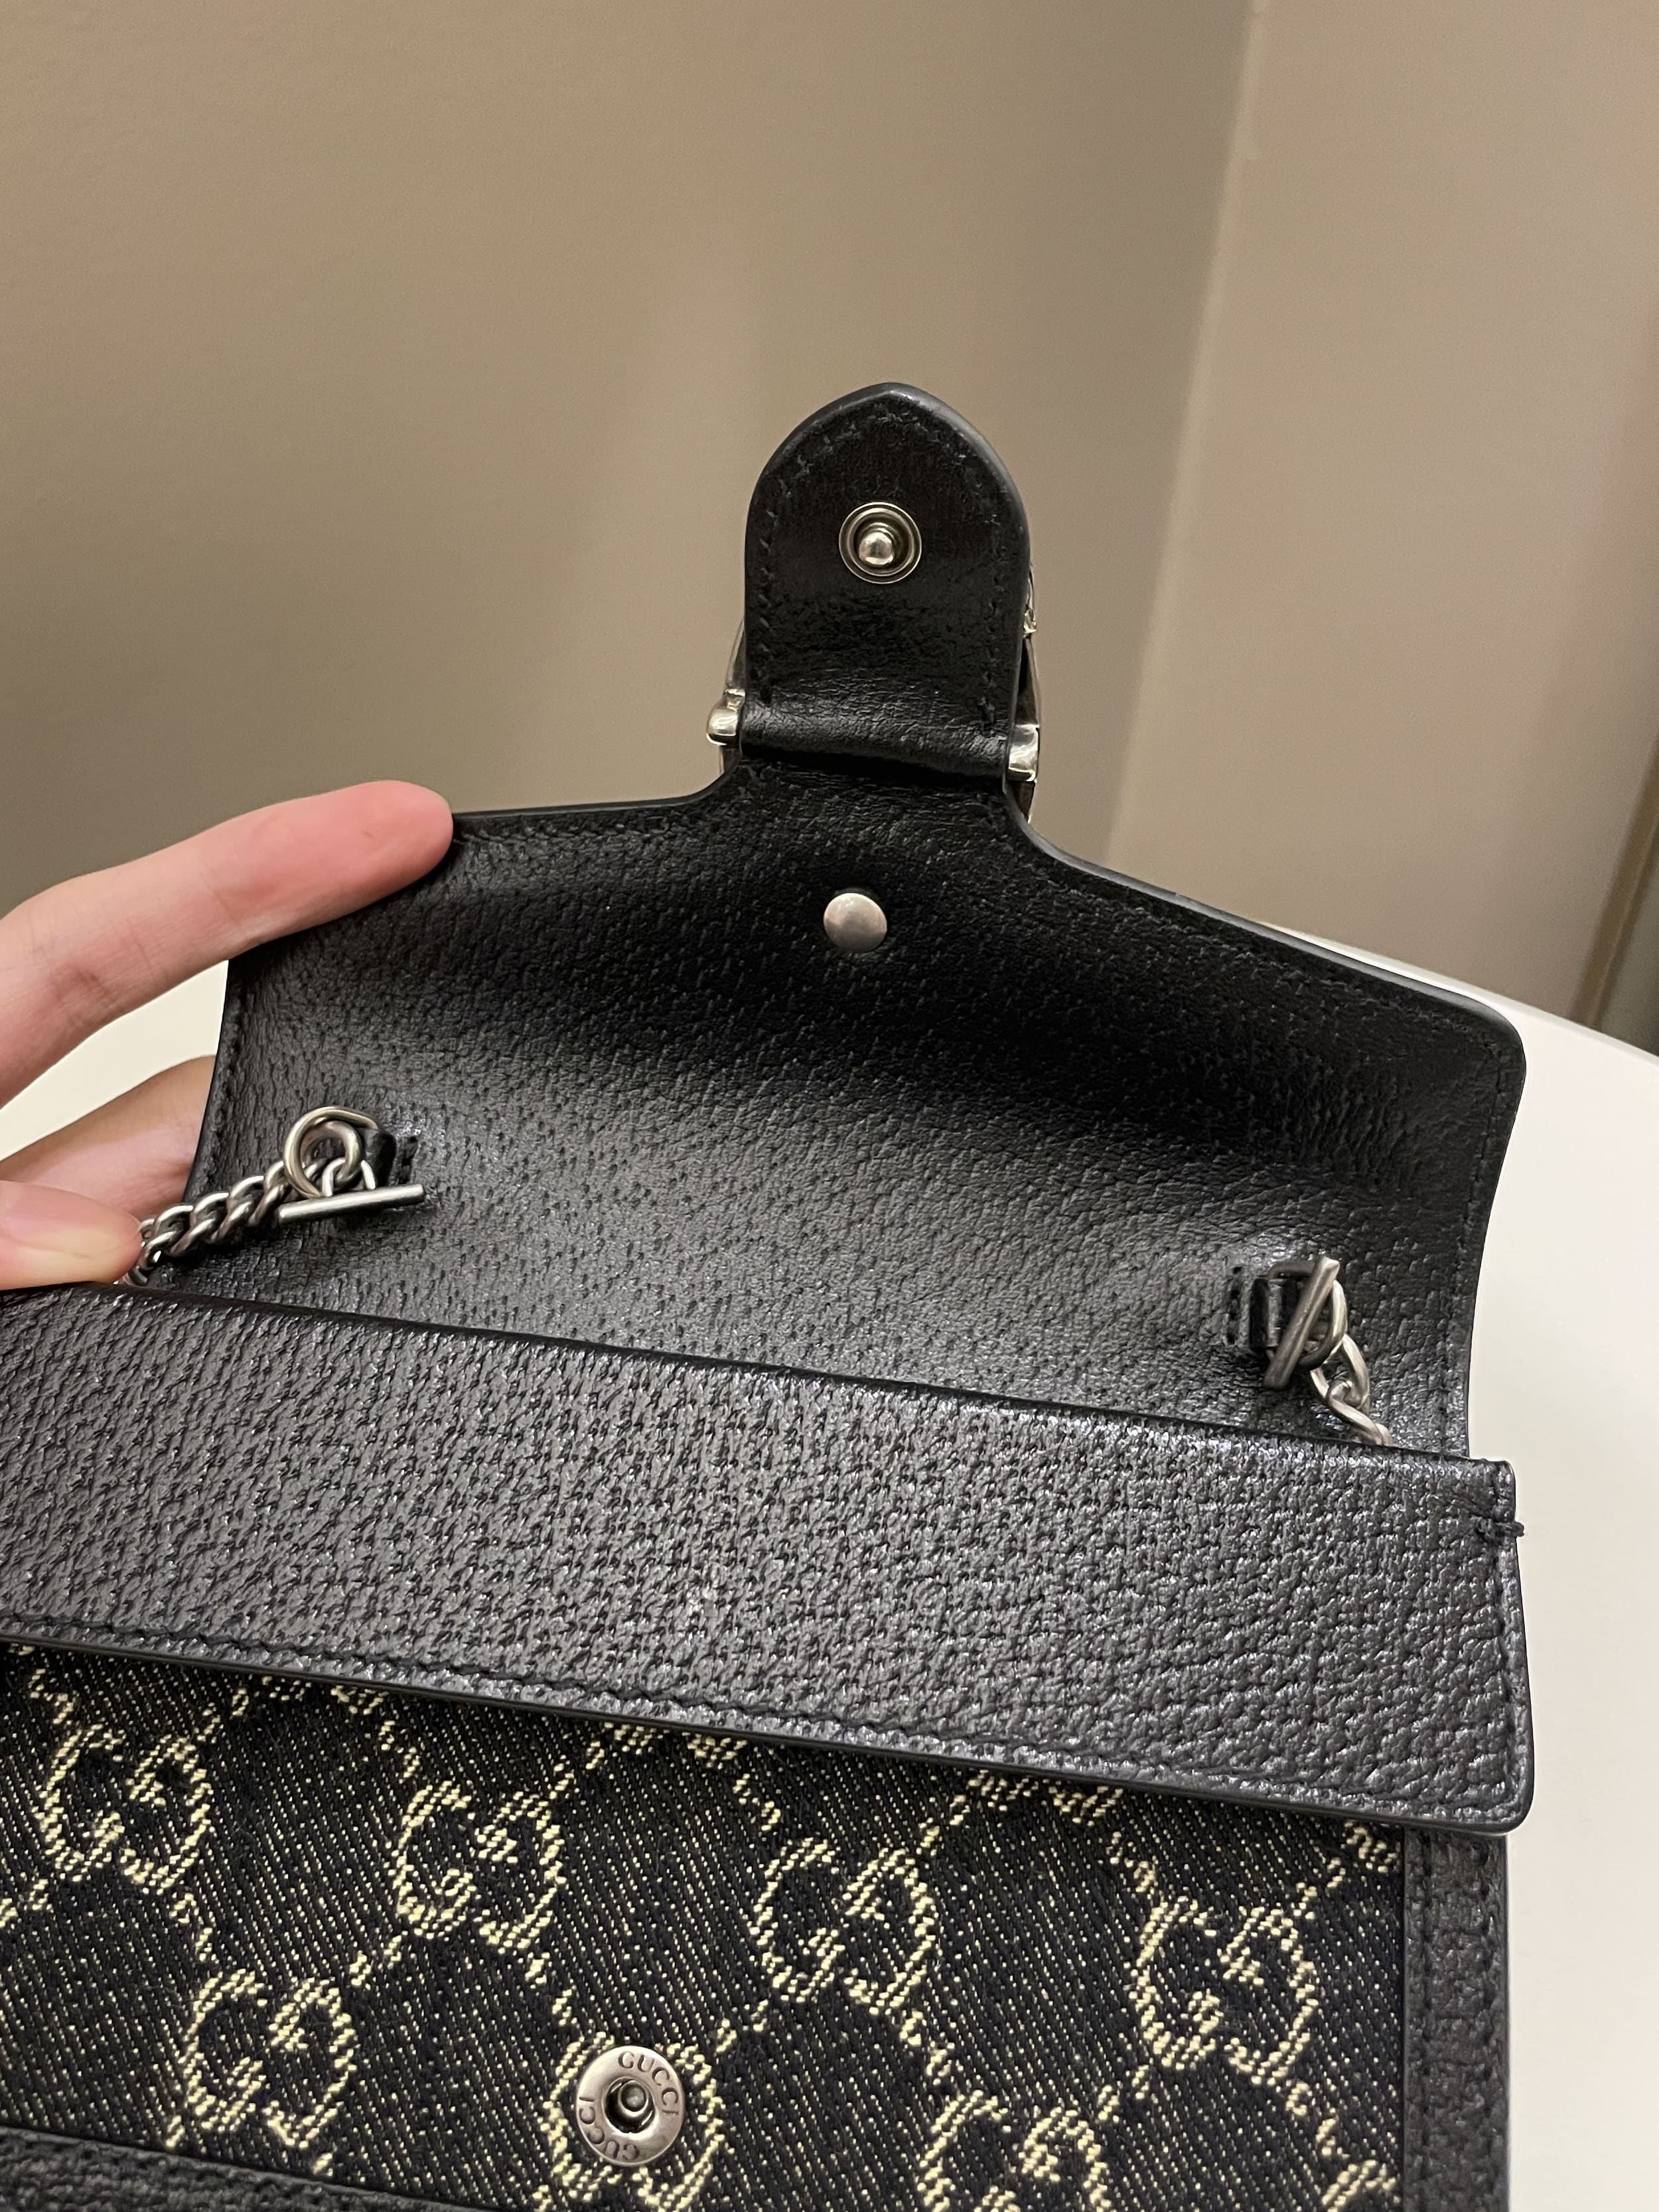 LoVey Goody - 🤩Don't Miss this! Brand New Hermes Picotin